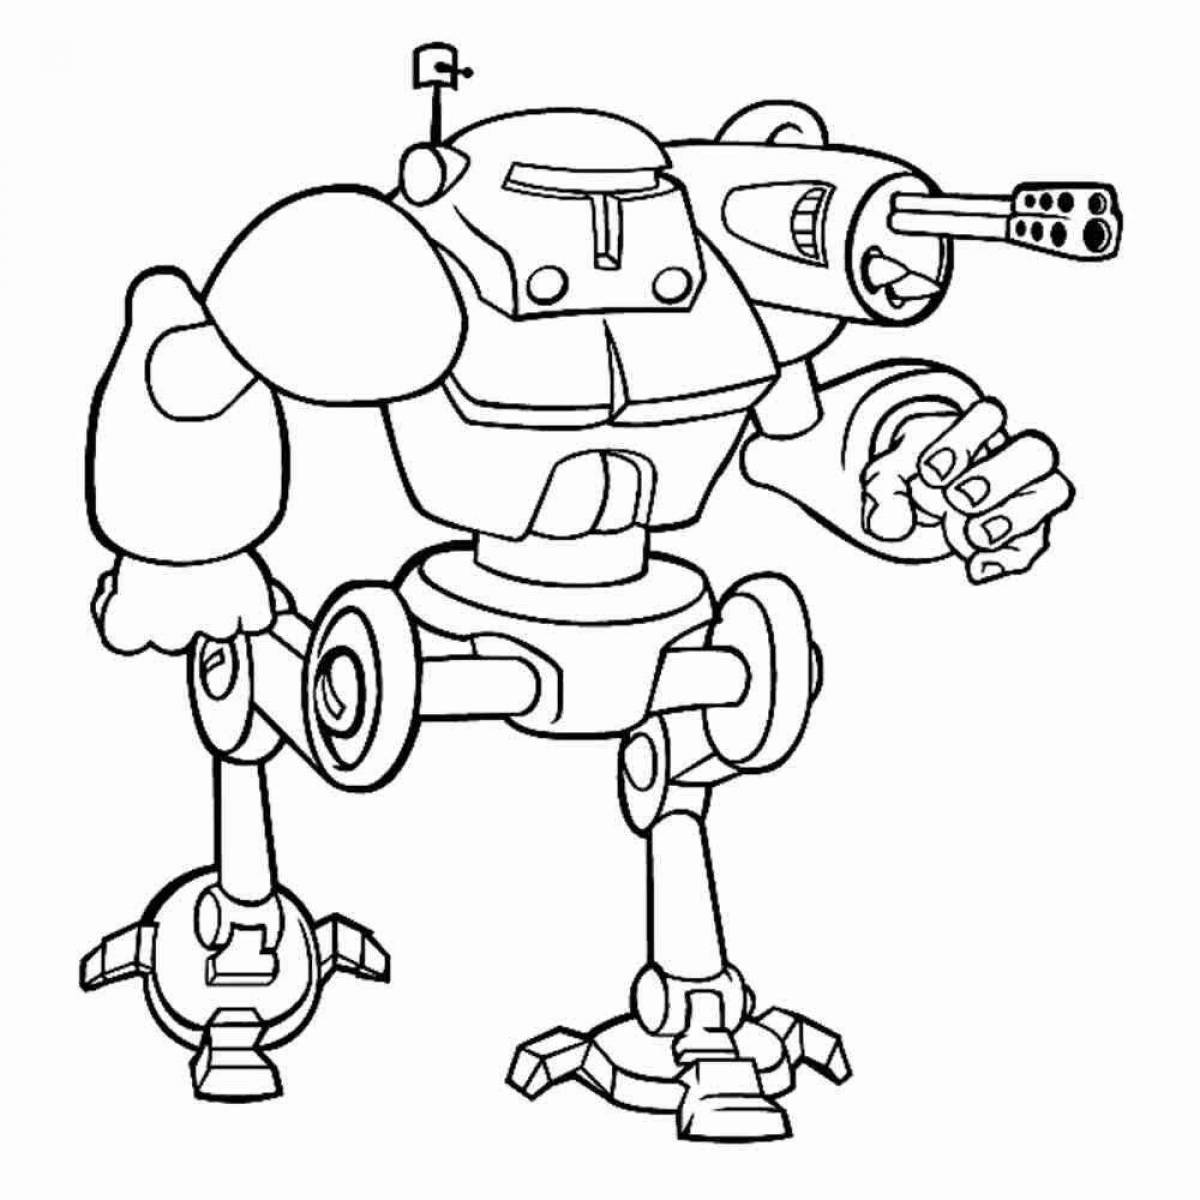 Color robot coloring book for kids